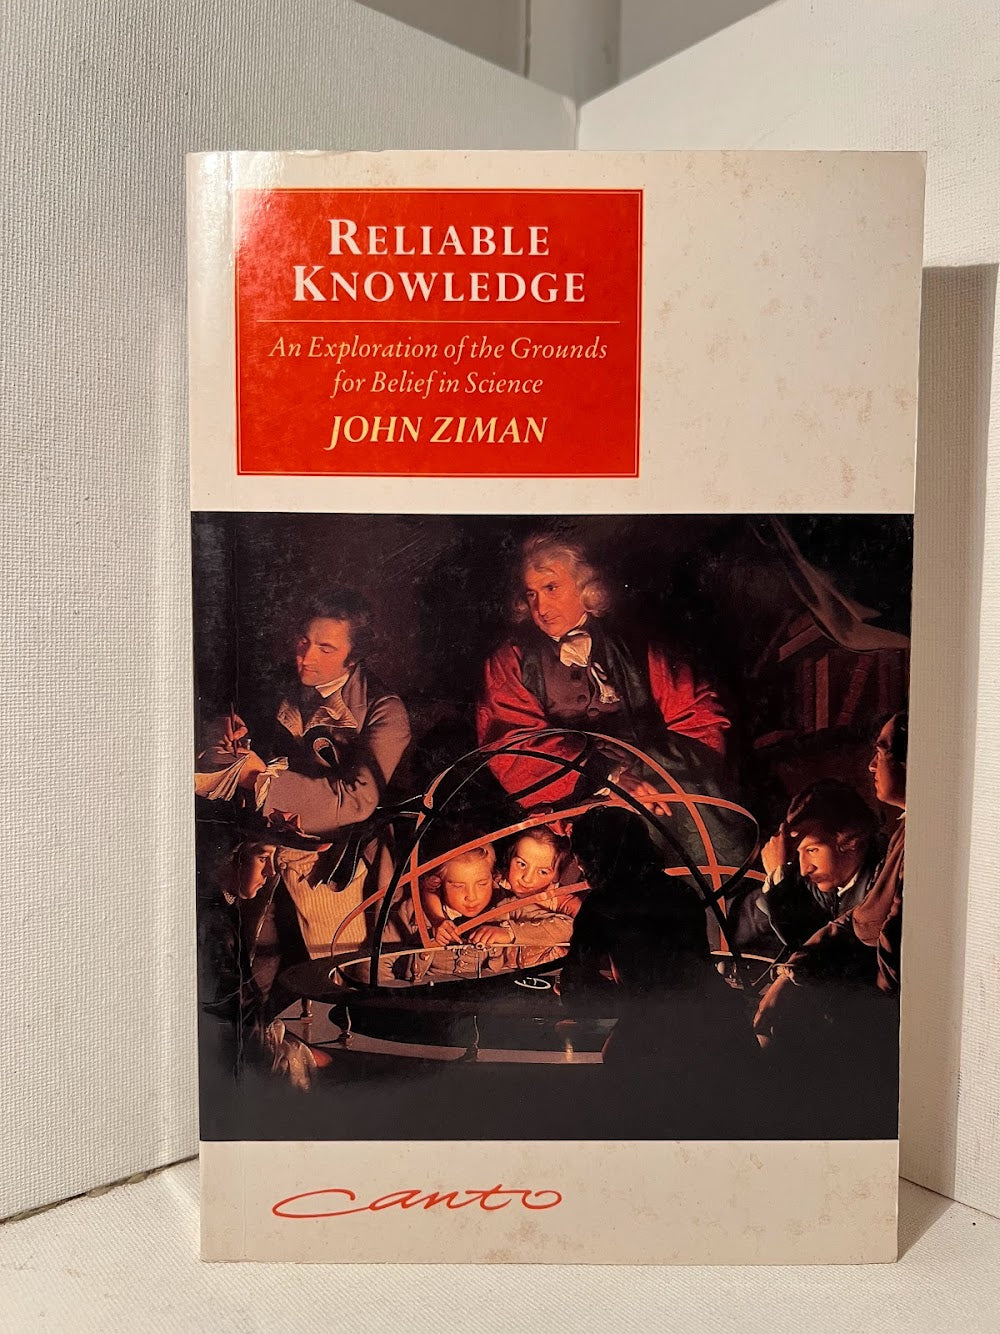 Reliable Knowledge by John Ziman